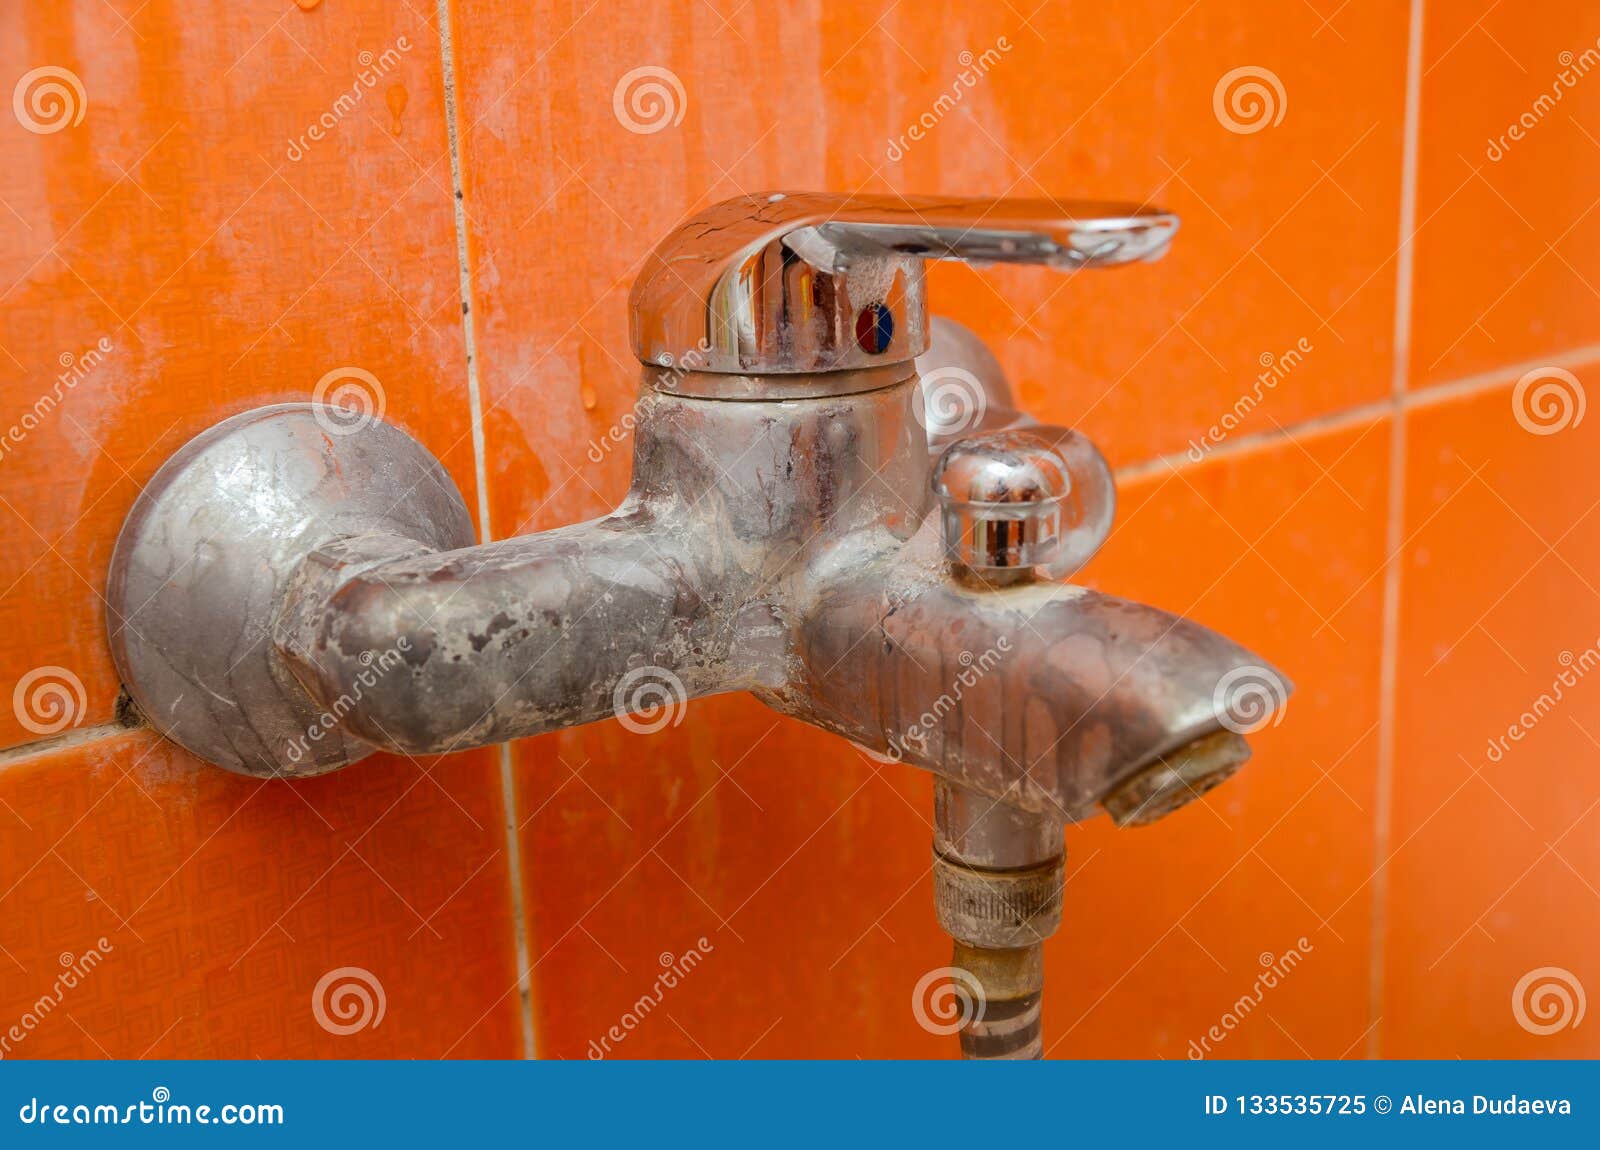 Mold Fungus And Limescale On The Bathroom Faucet Stock Image